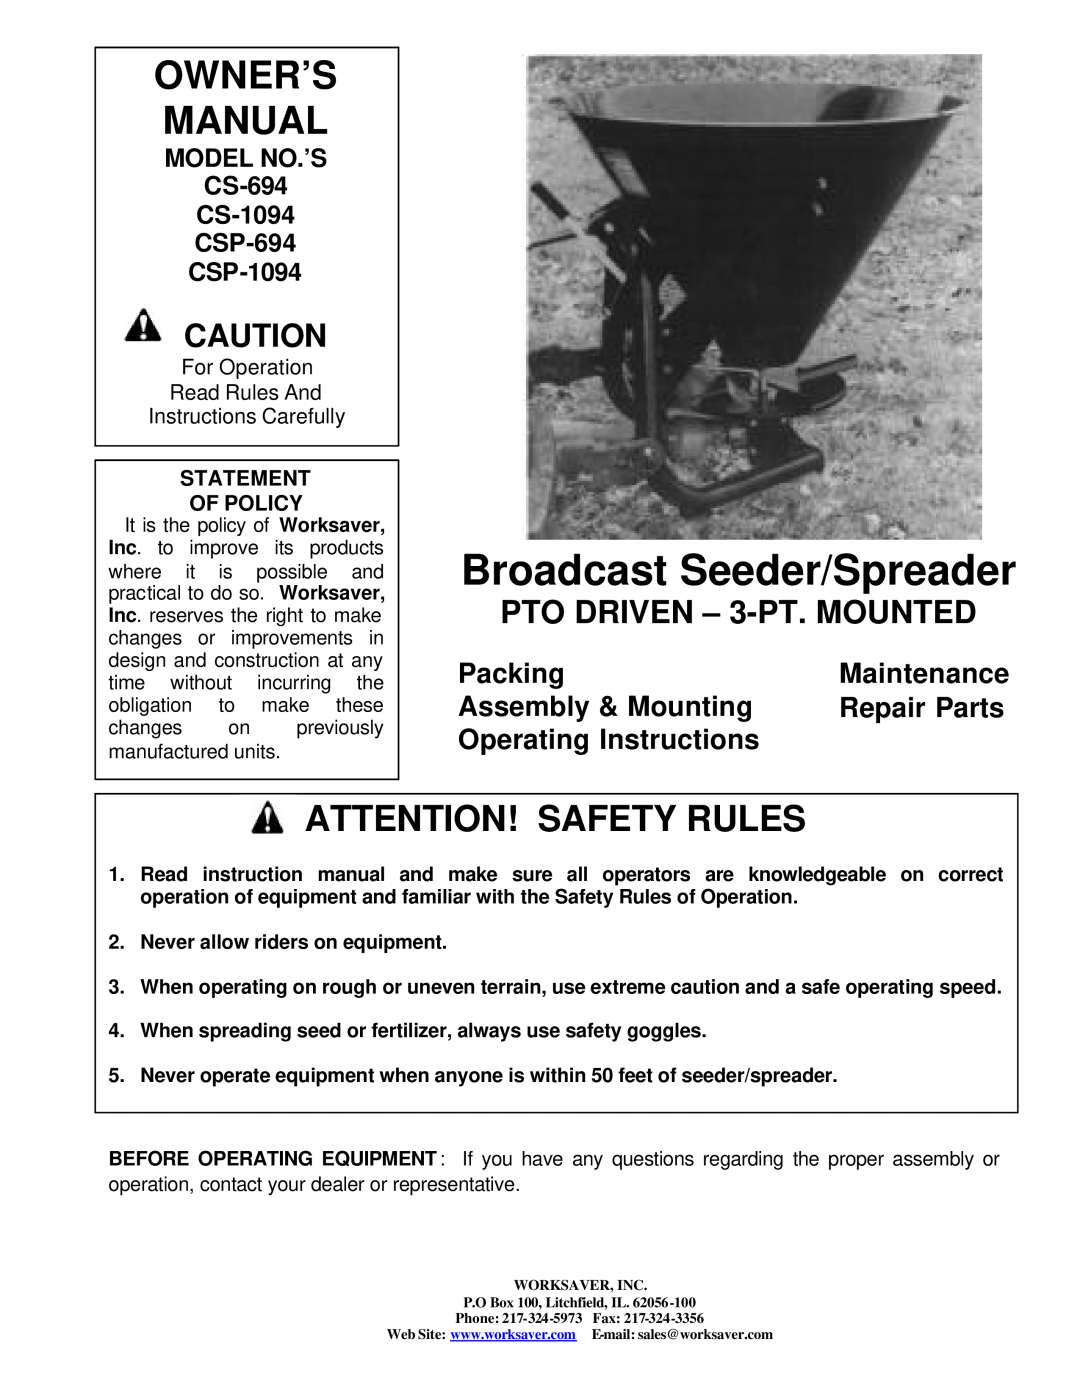 Worksaver CS-694, CS-1094, CSP-694, CSP-1094 instruction manual Attention! Safety Rules, PTO DRIVEN - 3-PT. MOUNTED 